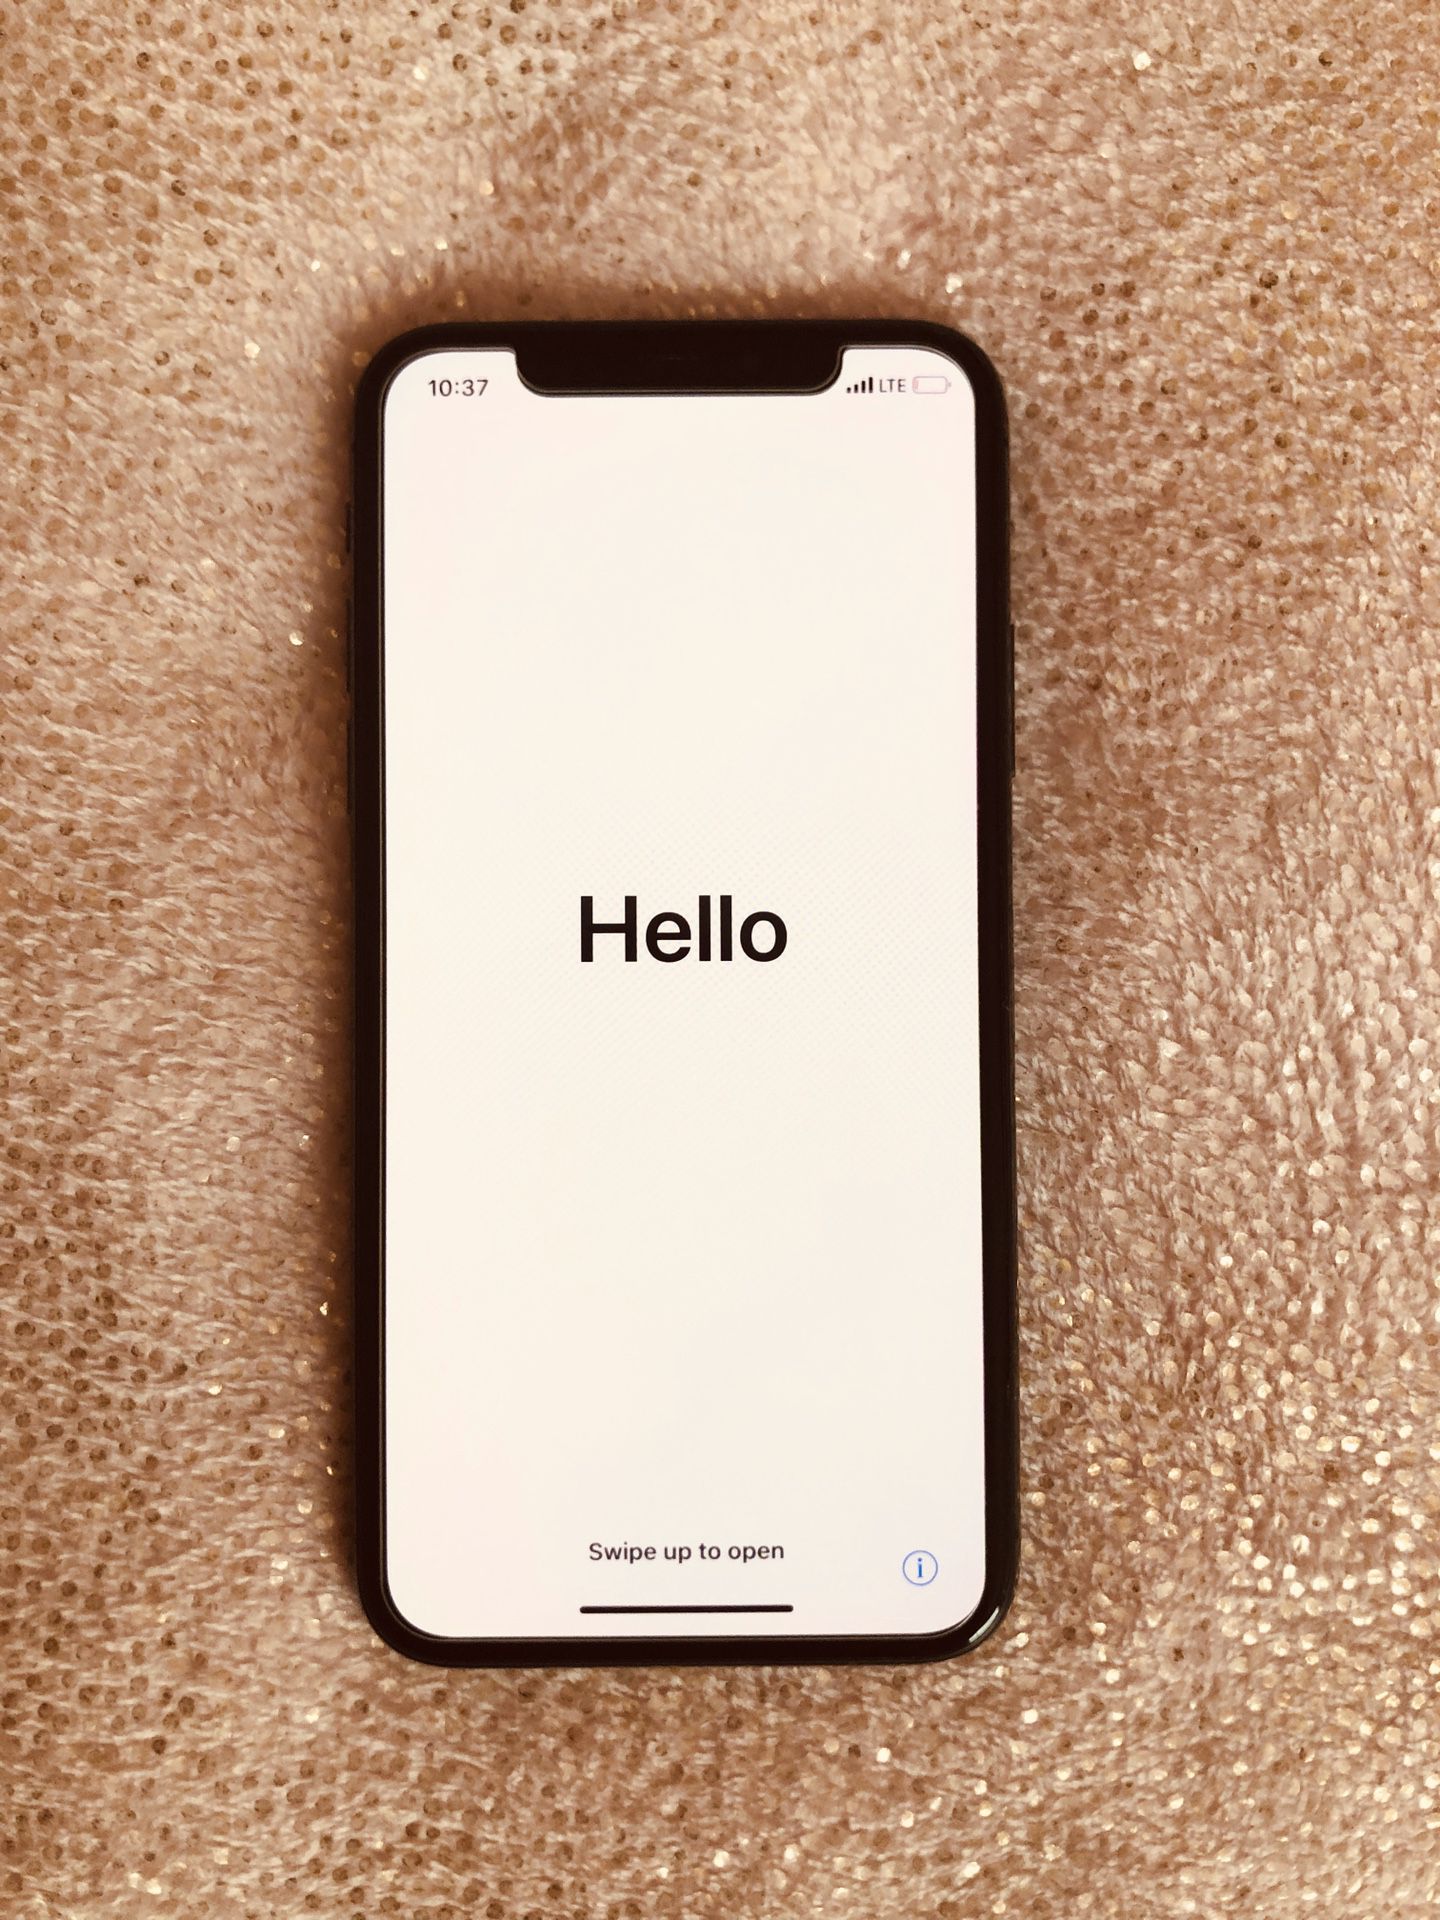 Unlocked Iphone x 256 GB, like new, in great condition. Can meet up or delivery.